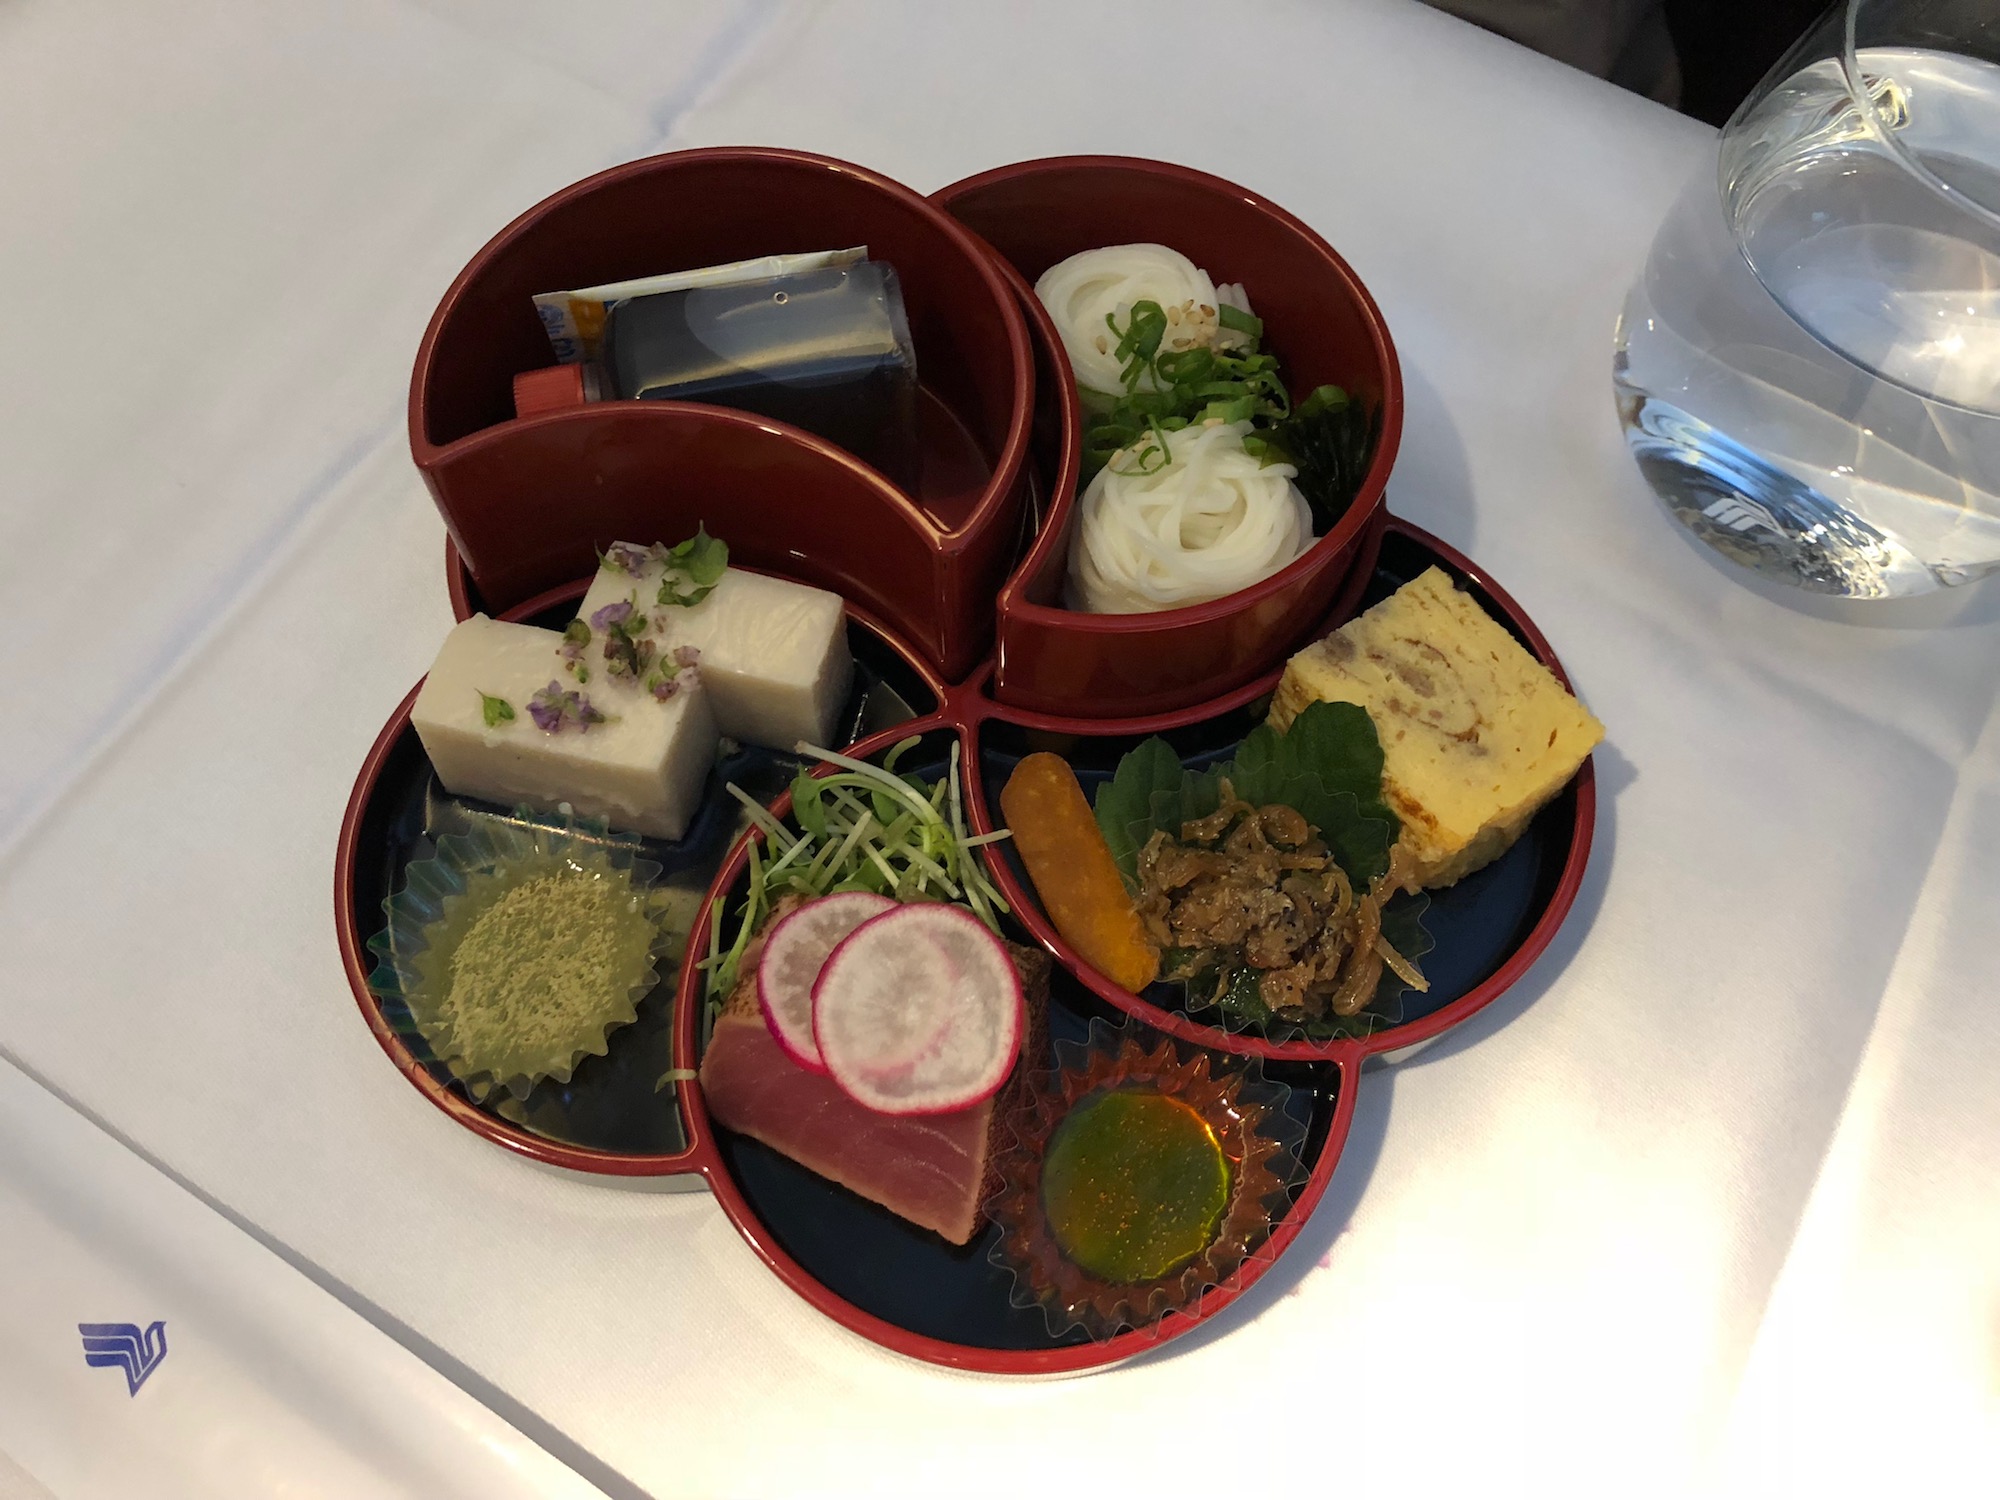 Singapore Airlines 777-300 Business Class food